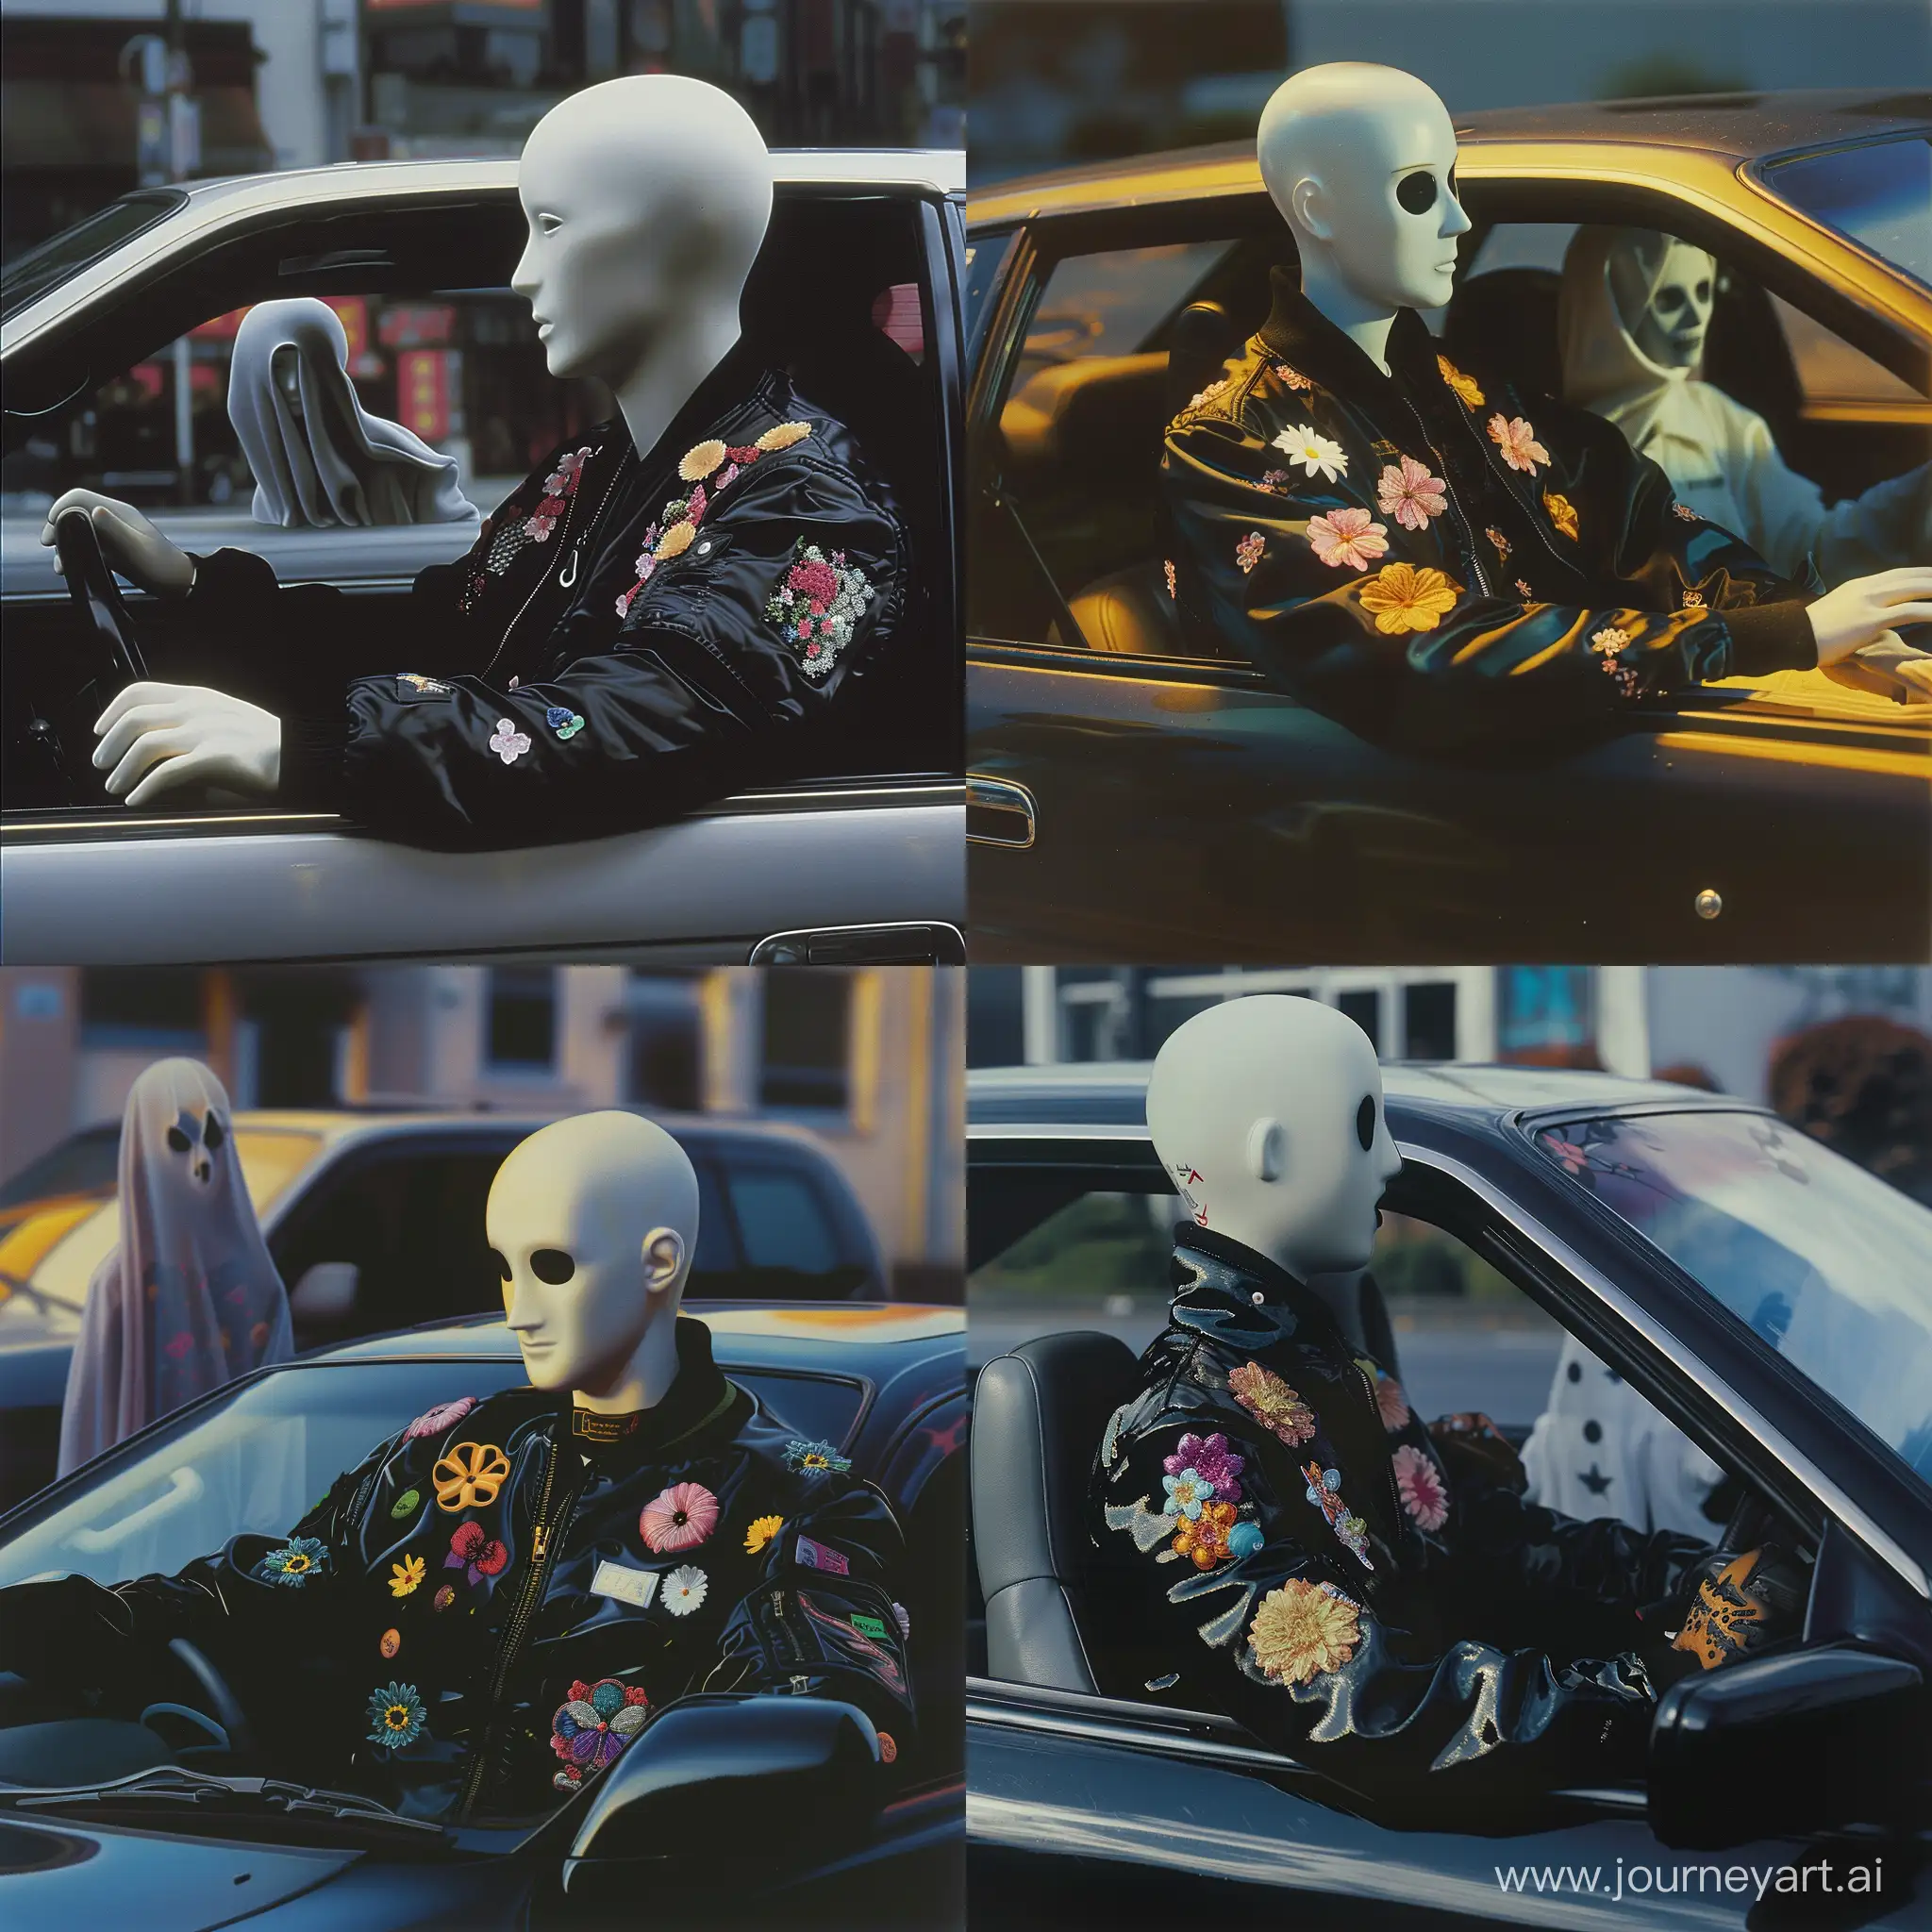 Antipop-90s-Film-Album-Art-Mannequin-Driving-Japanese-Tuner-Car-with-Flower-Patch-Jacket-and-Ghost-Passenger